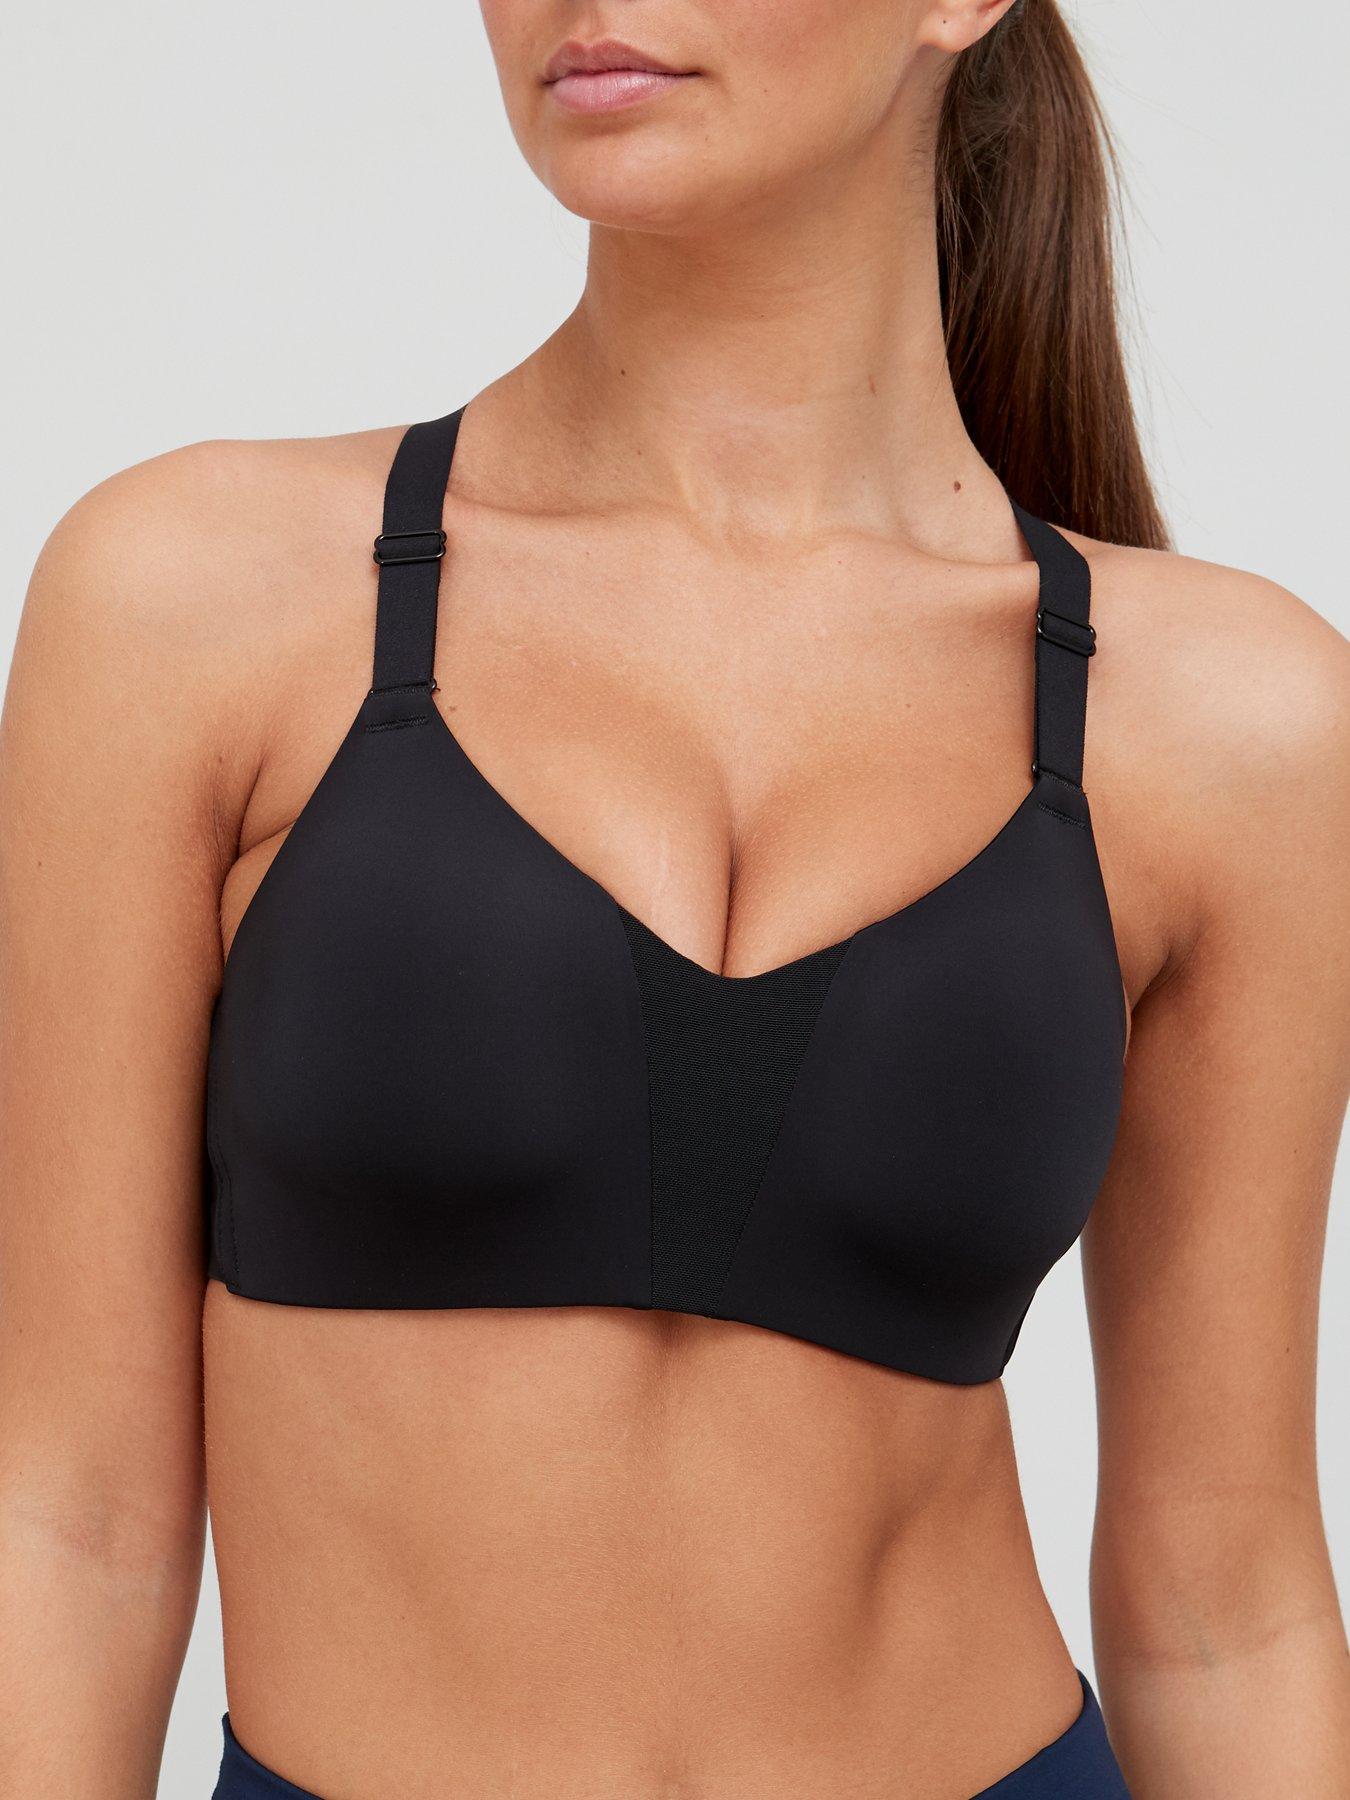 Nike High Support Rival Sports Bra 